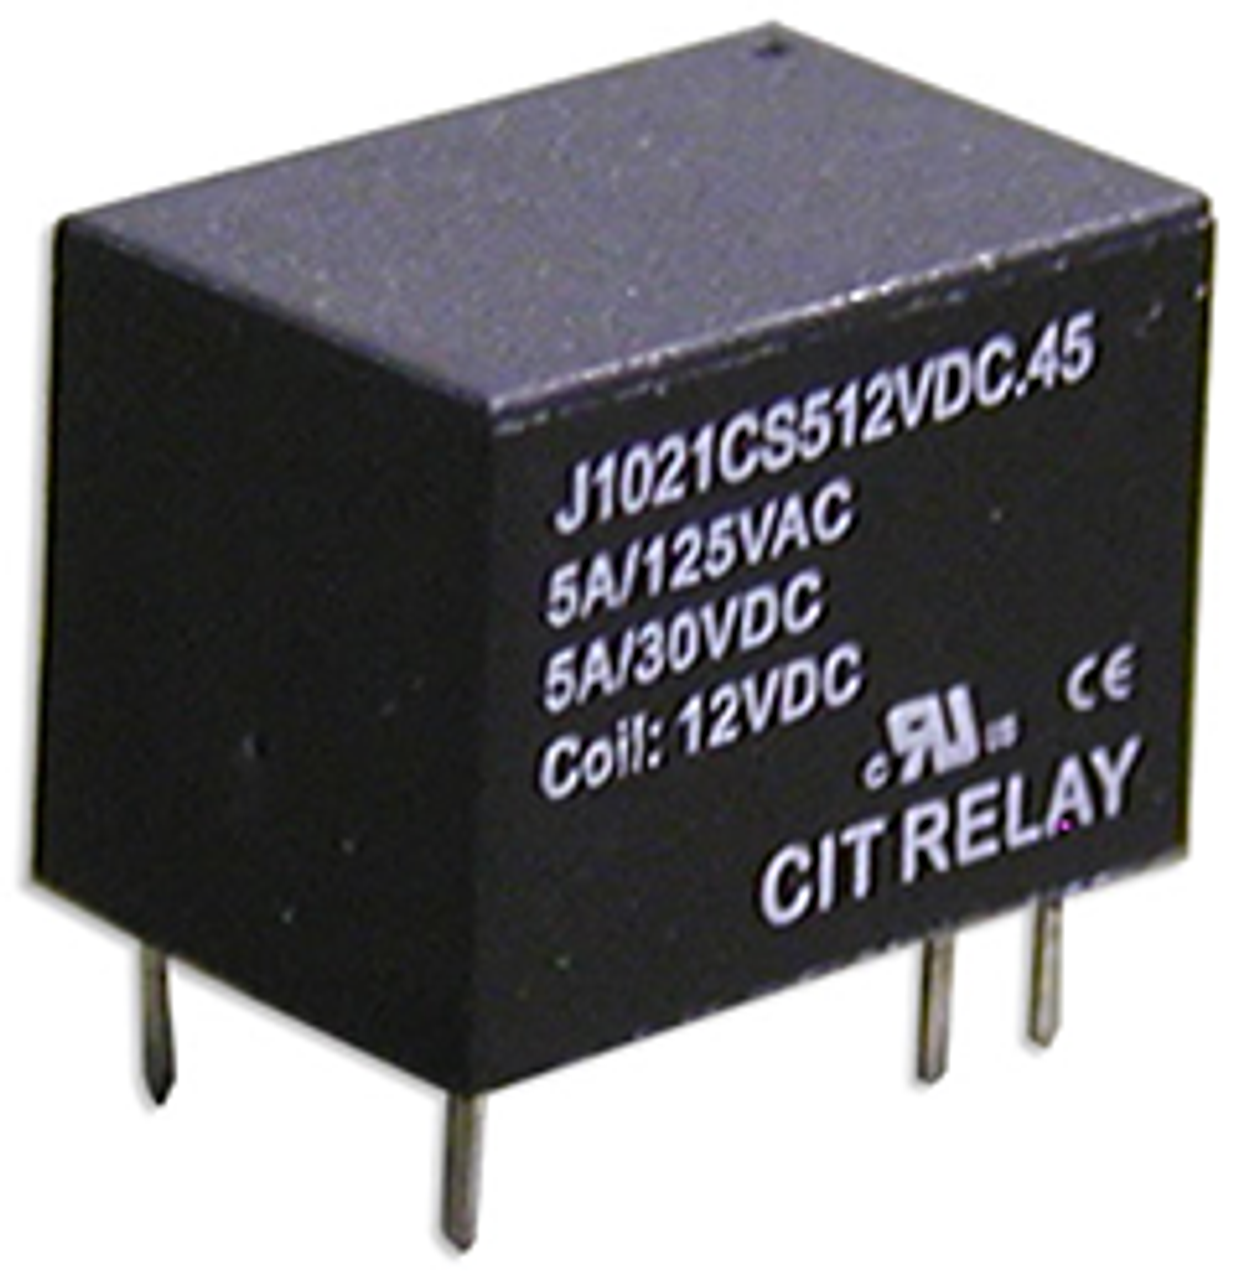 CIT Relay and Switch J1021AS33VDC.20 Power Relays